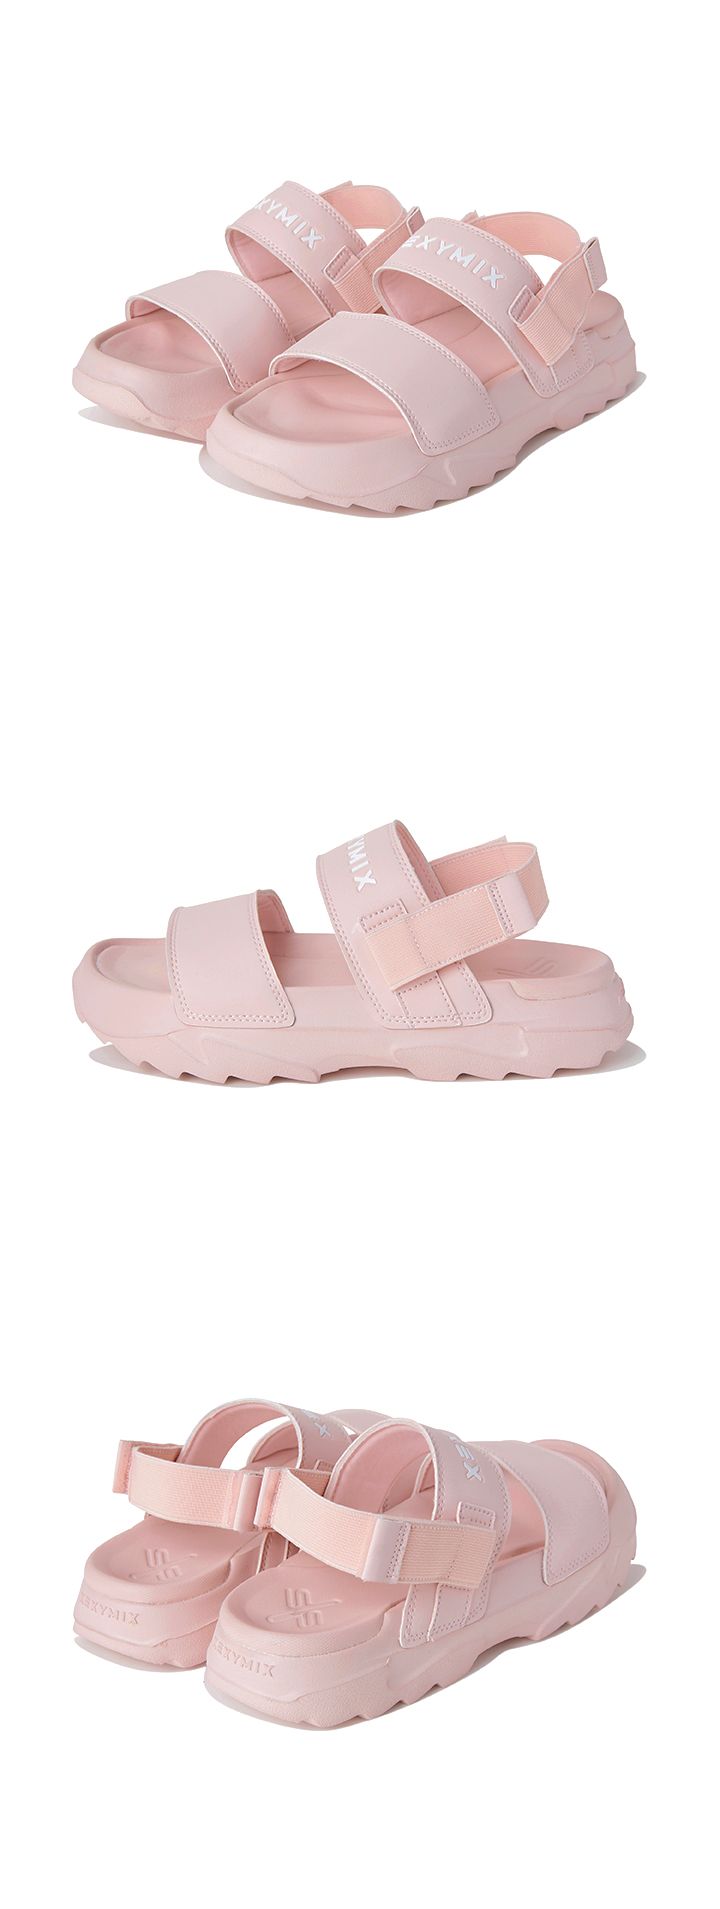  XED223C_Slide & Sandal X-Strap Leather 2 Ways Shoes_Baby Pink 